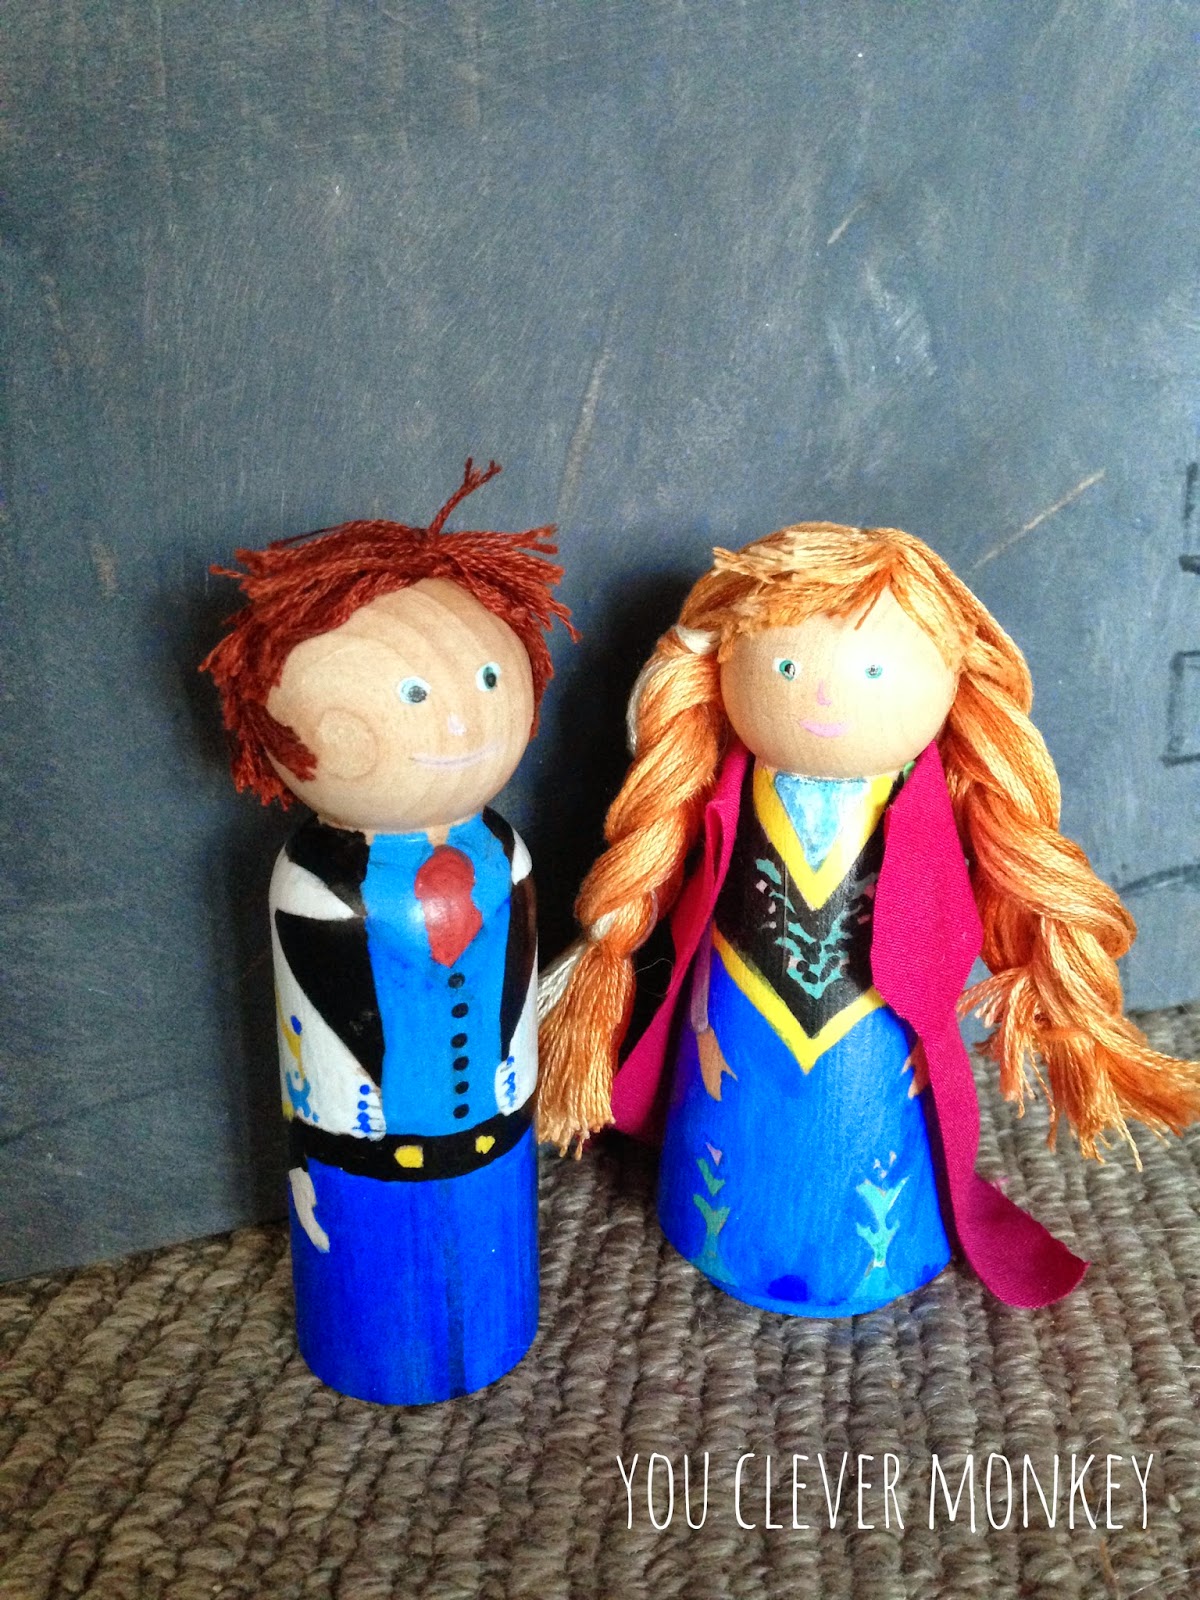 DIY Frozen Peg People - how to make your own Frozen characters for play from simple wooden peg dolls. Step by step instructions to help you create your own | you clever monkey